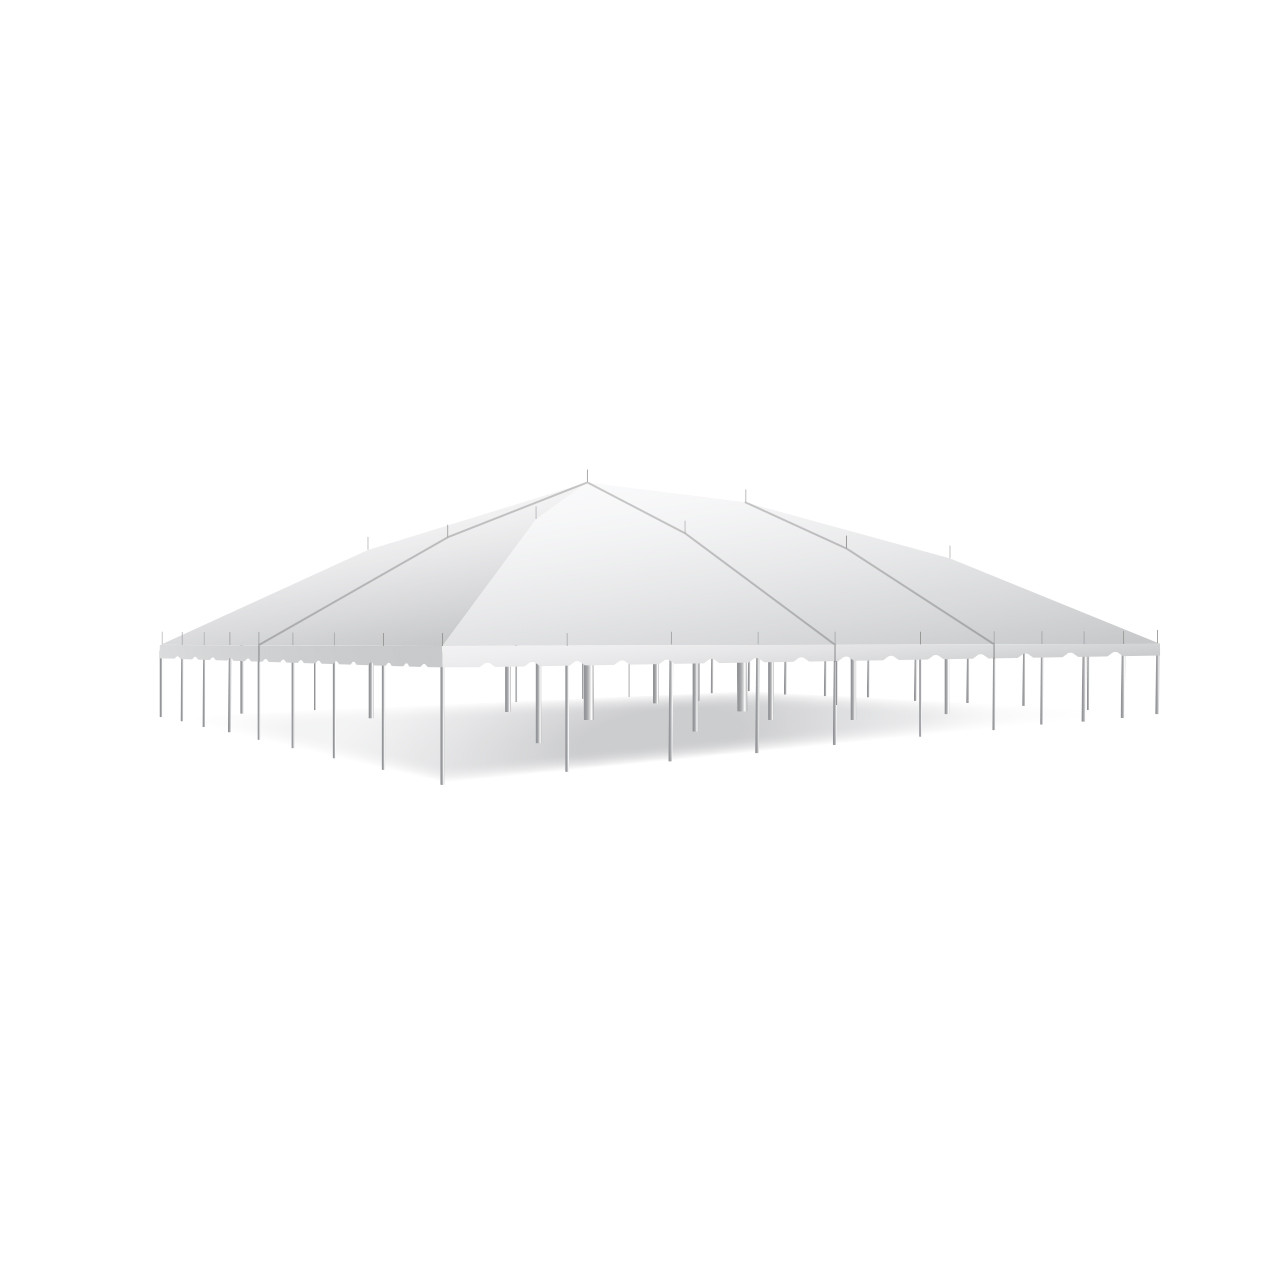 60' x 80' Classic Series Pole Tent, Sectional Tent Top, Complete